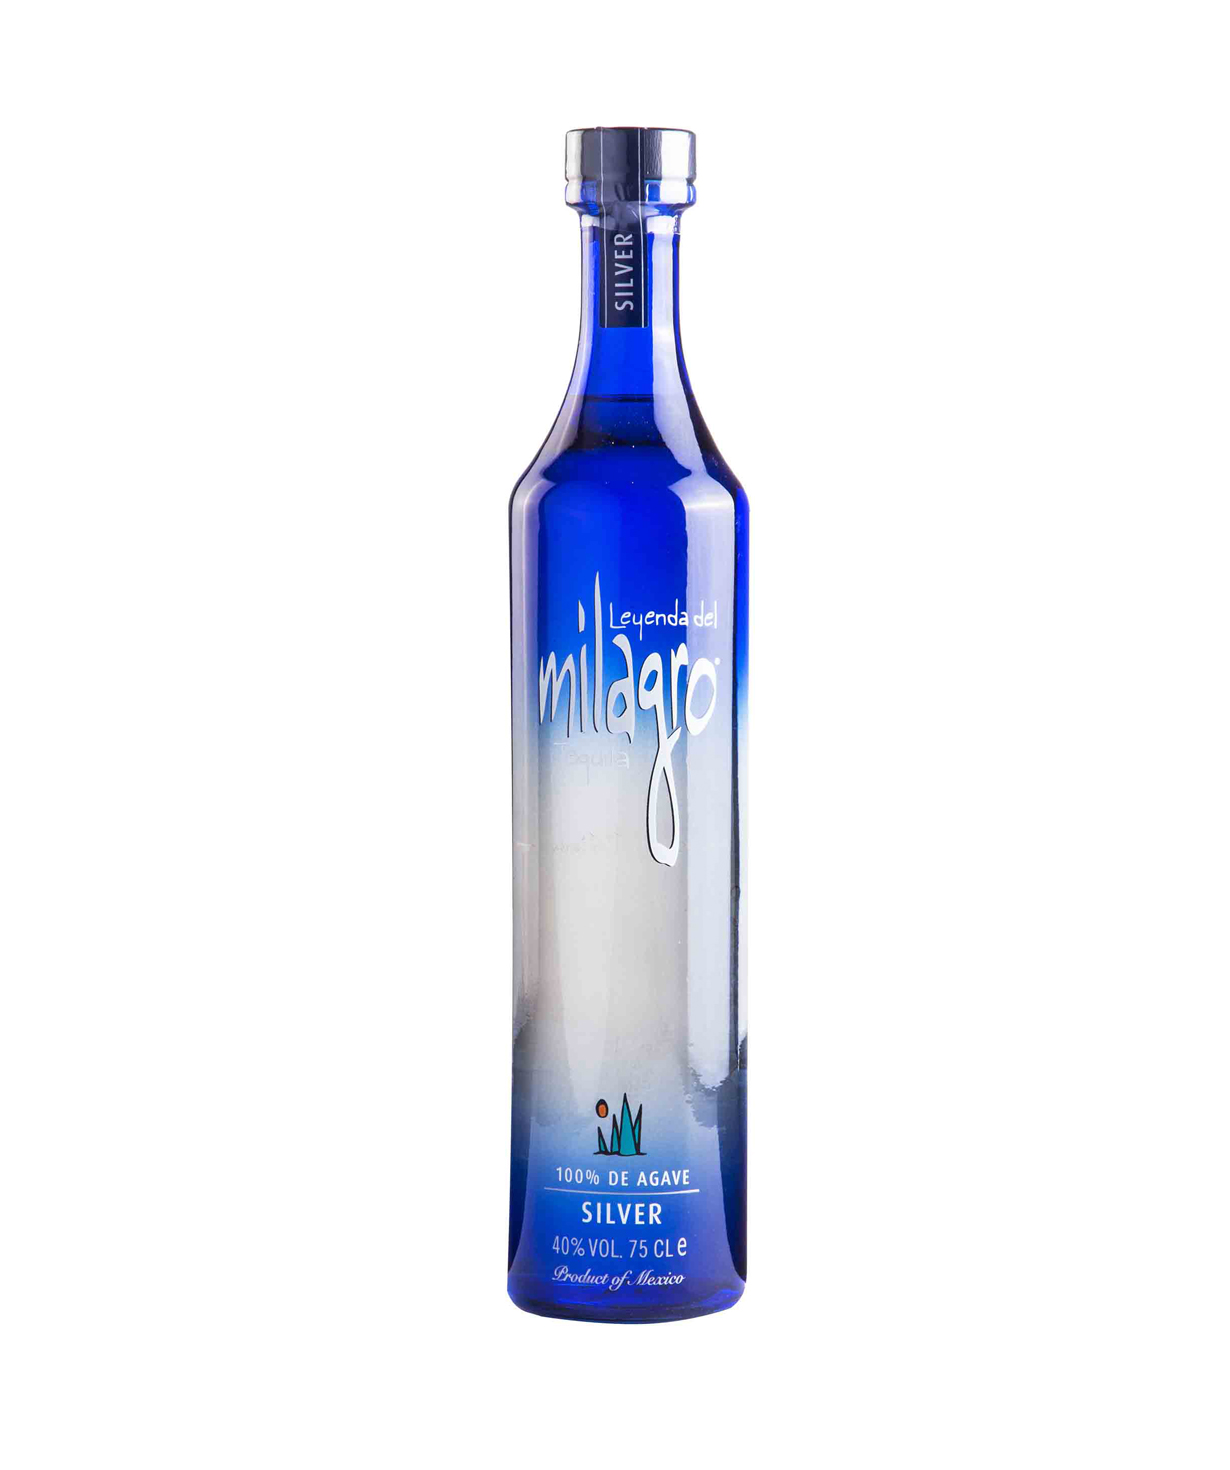 Tequila Milagro Silver 0.75l